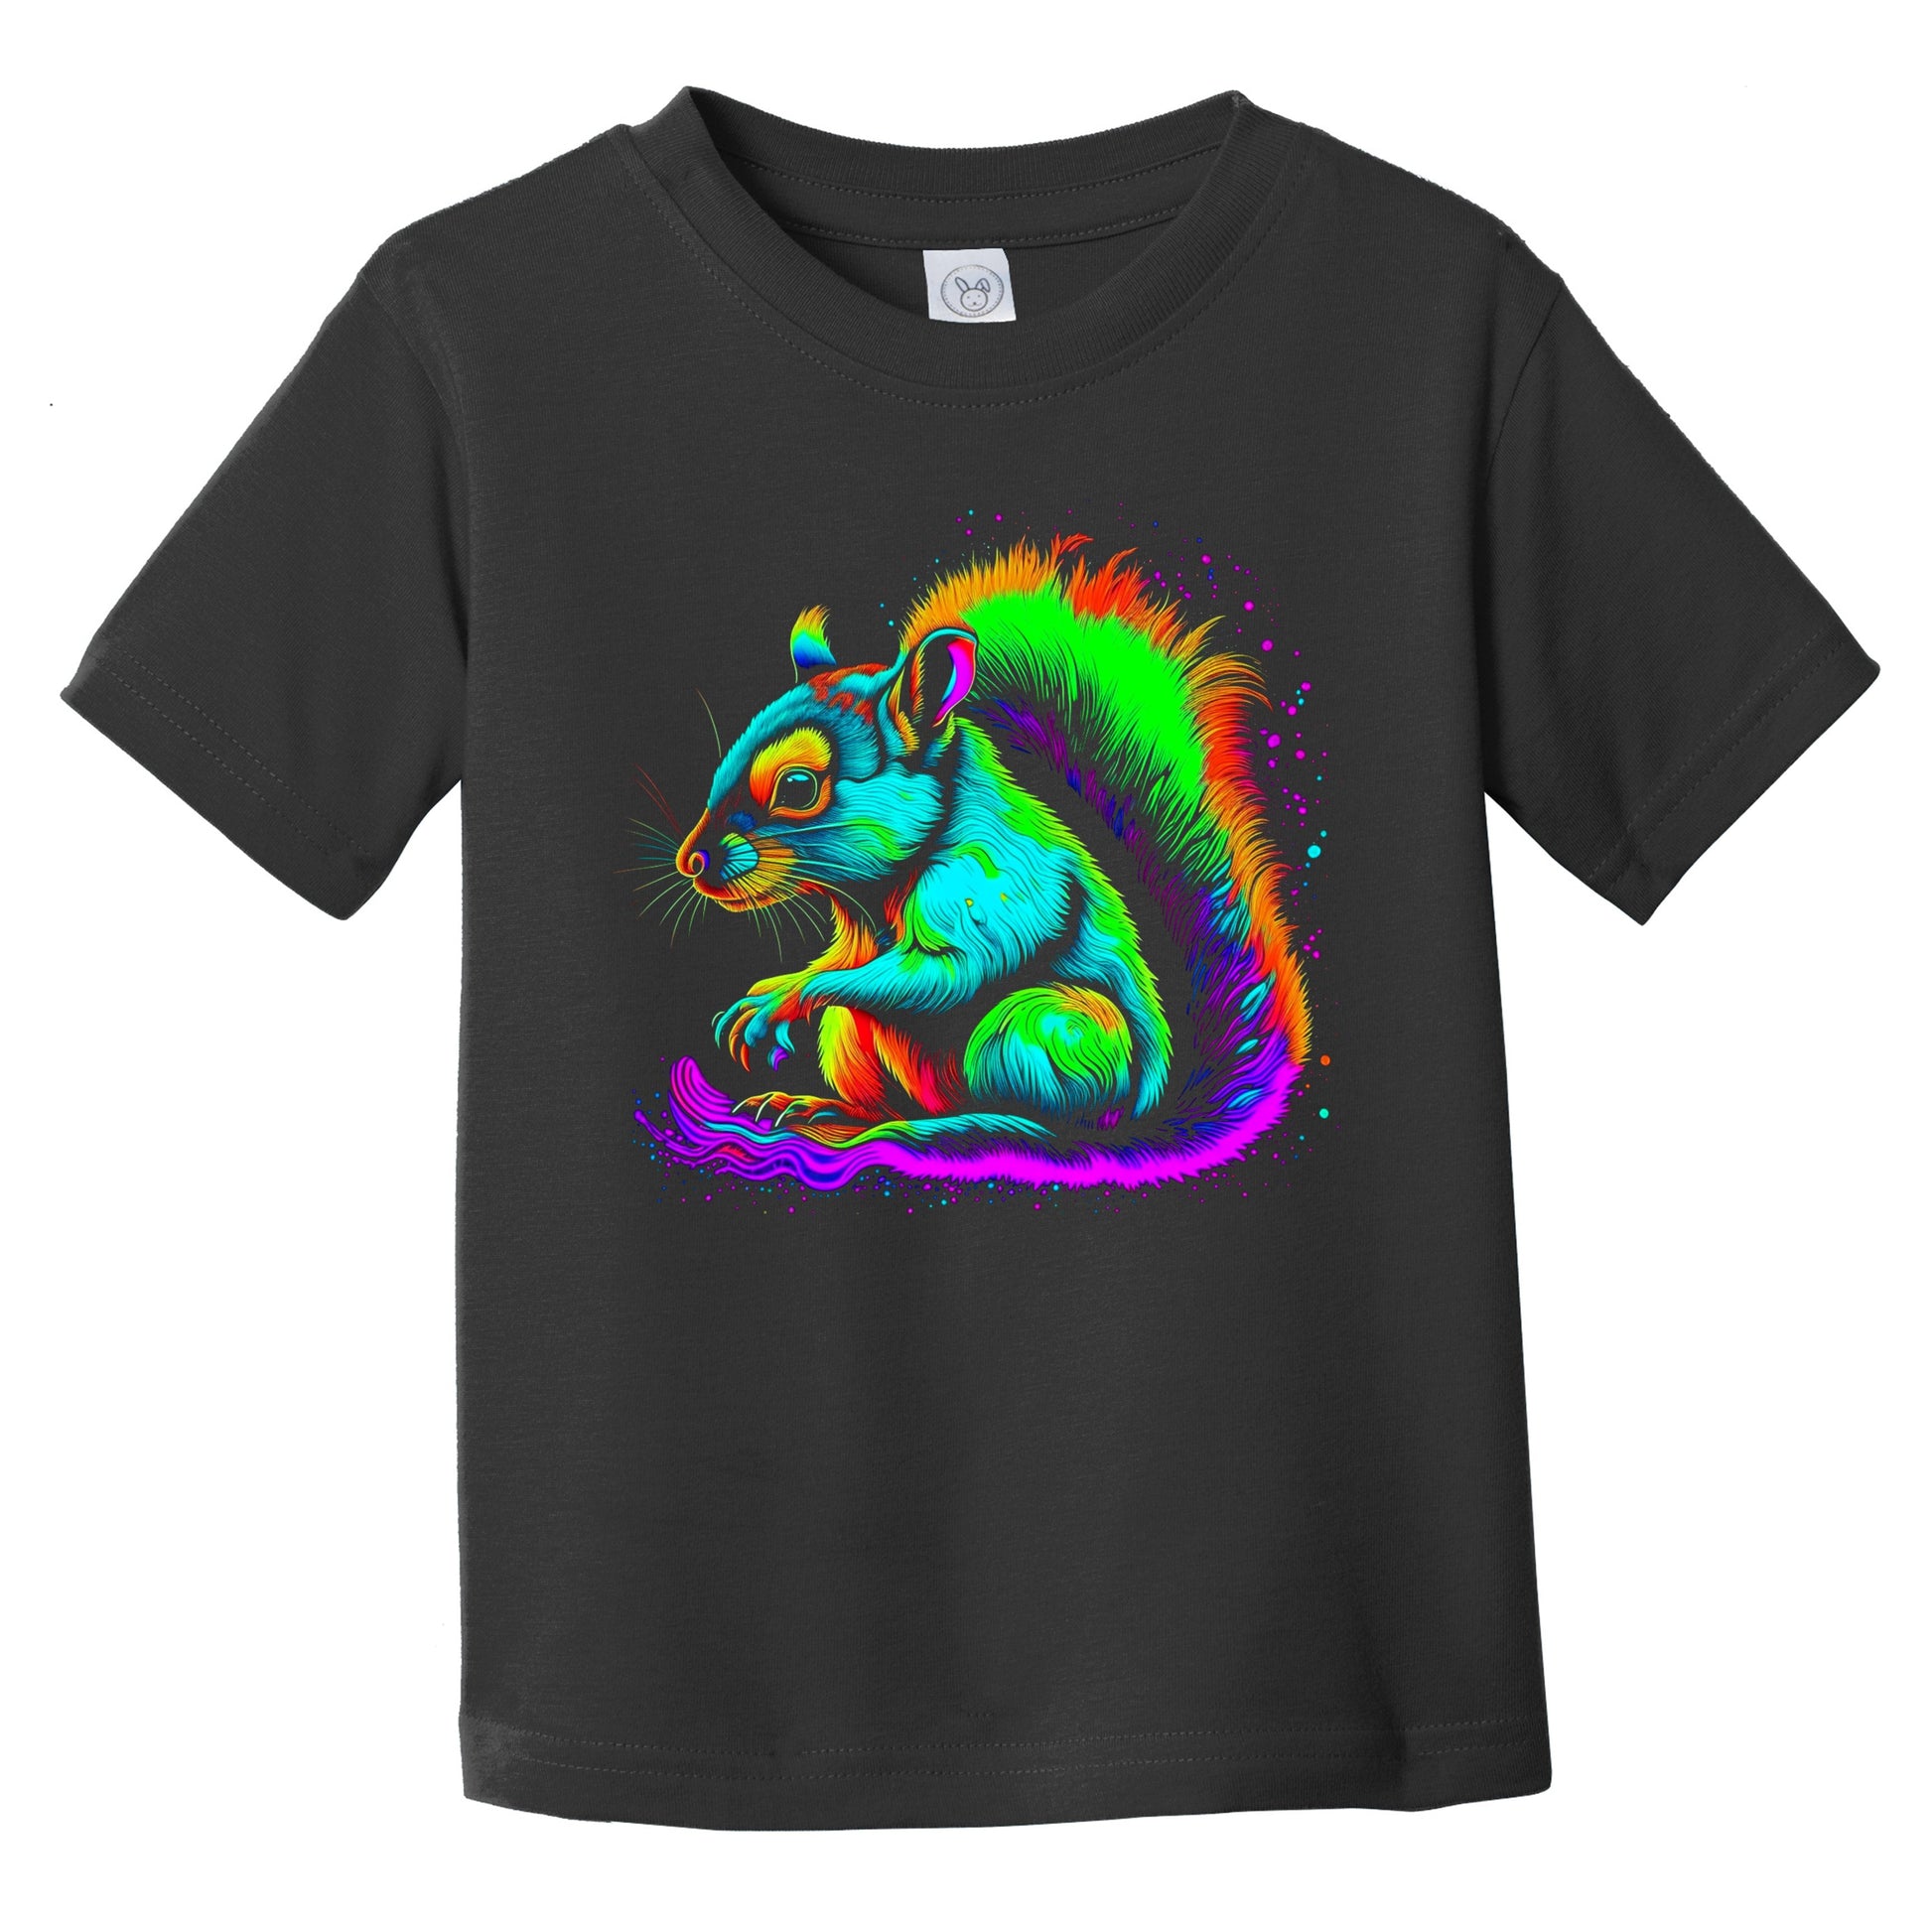 Colorful Bright Squirrel Vibrant Psychedelic Animal Art Infant Toddler T-Shirt